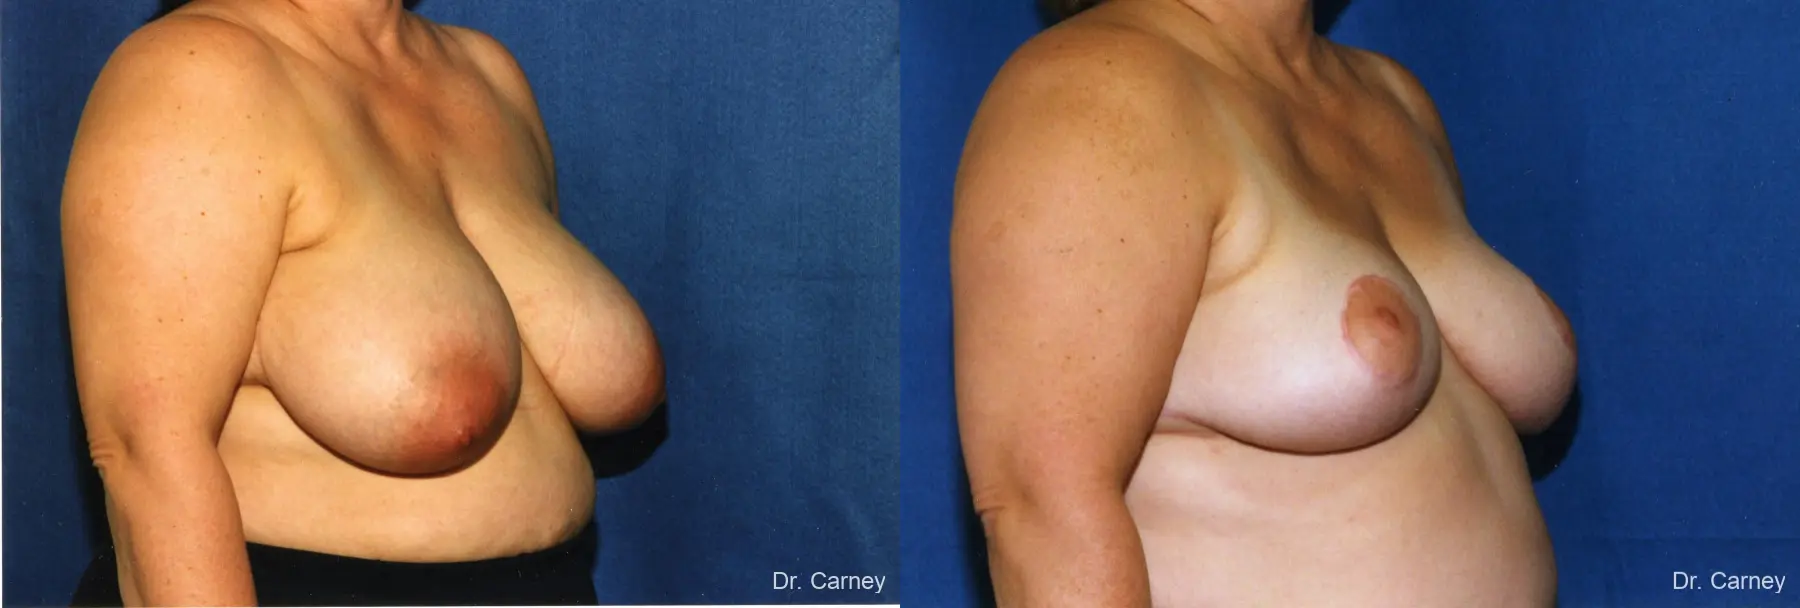 Virginia Beach Breast Lift 1188 - Before and After